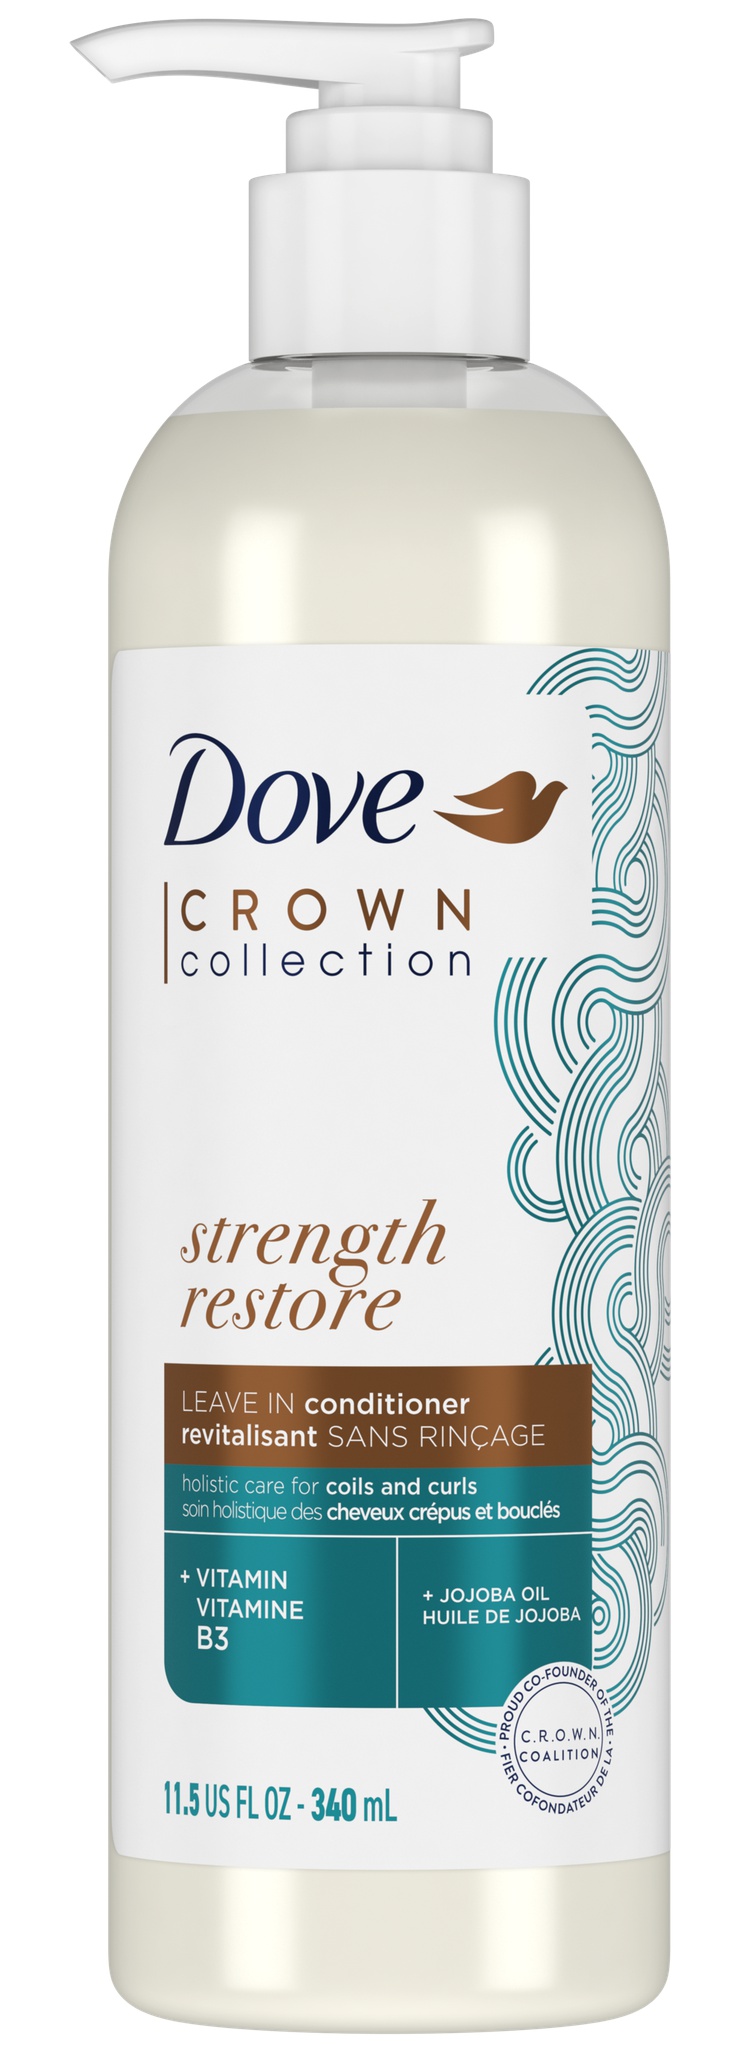 Dove Crown Collection Strength Restore Leave In Conditioner